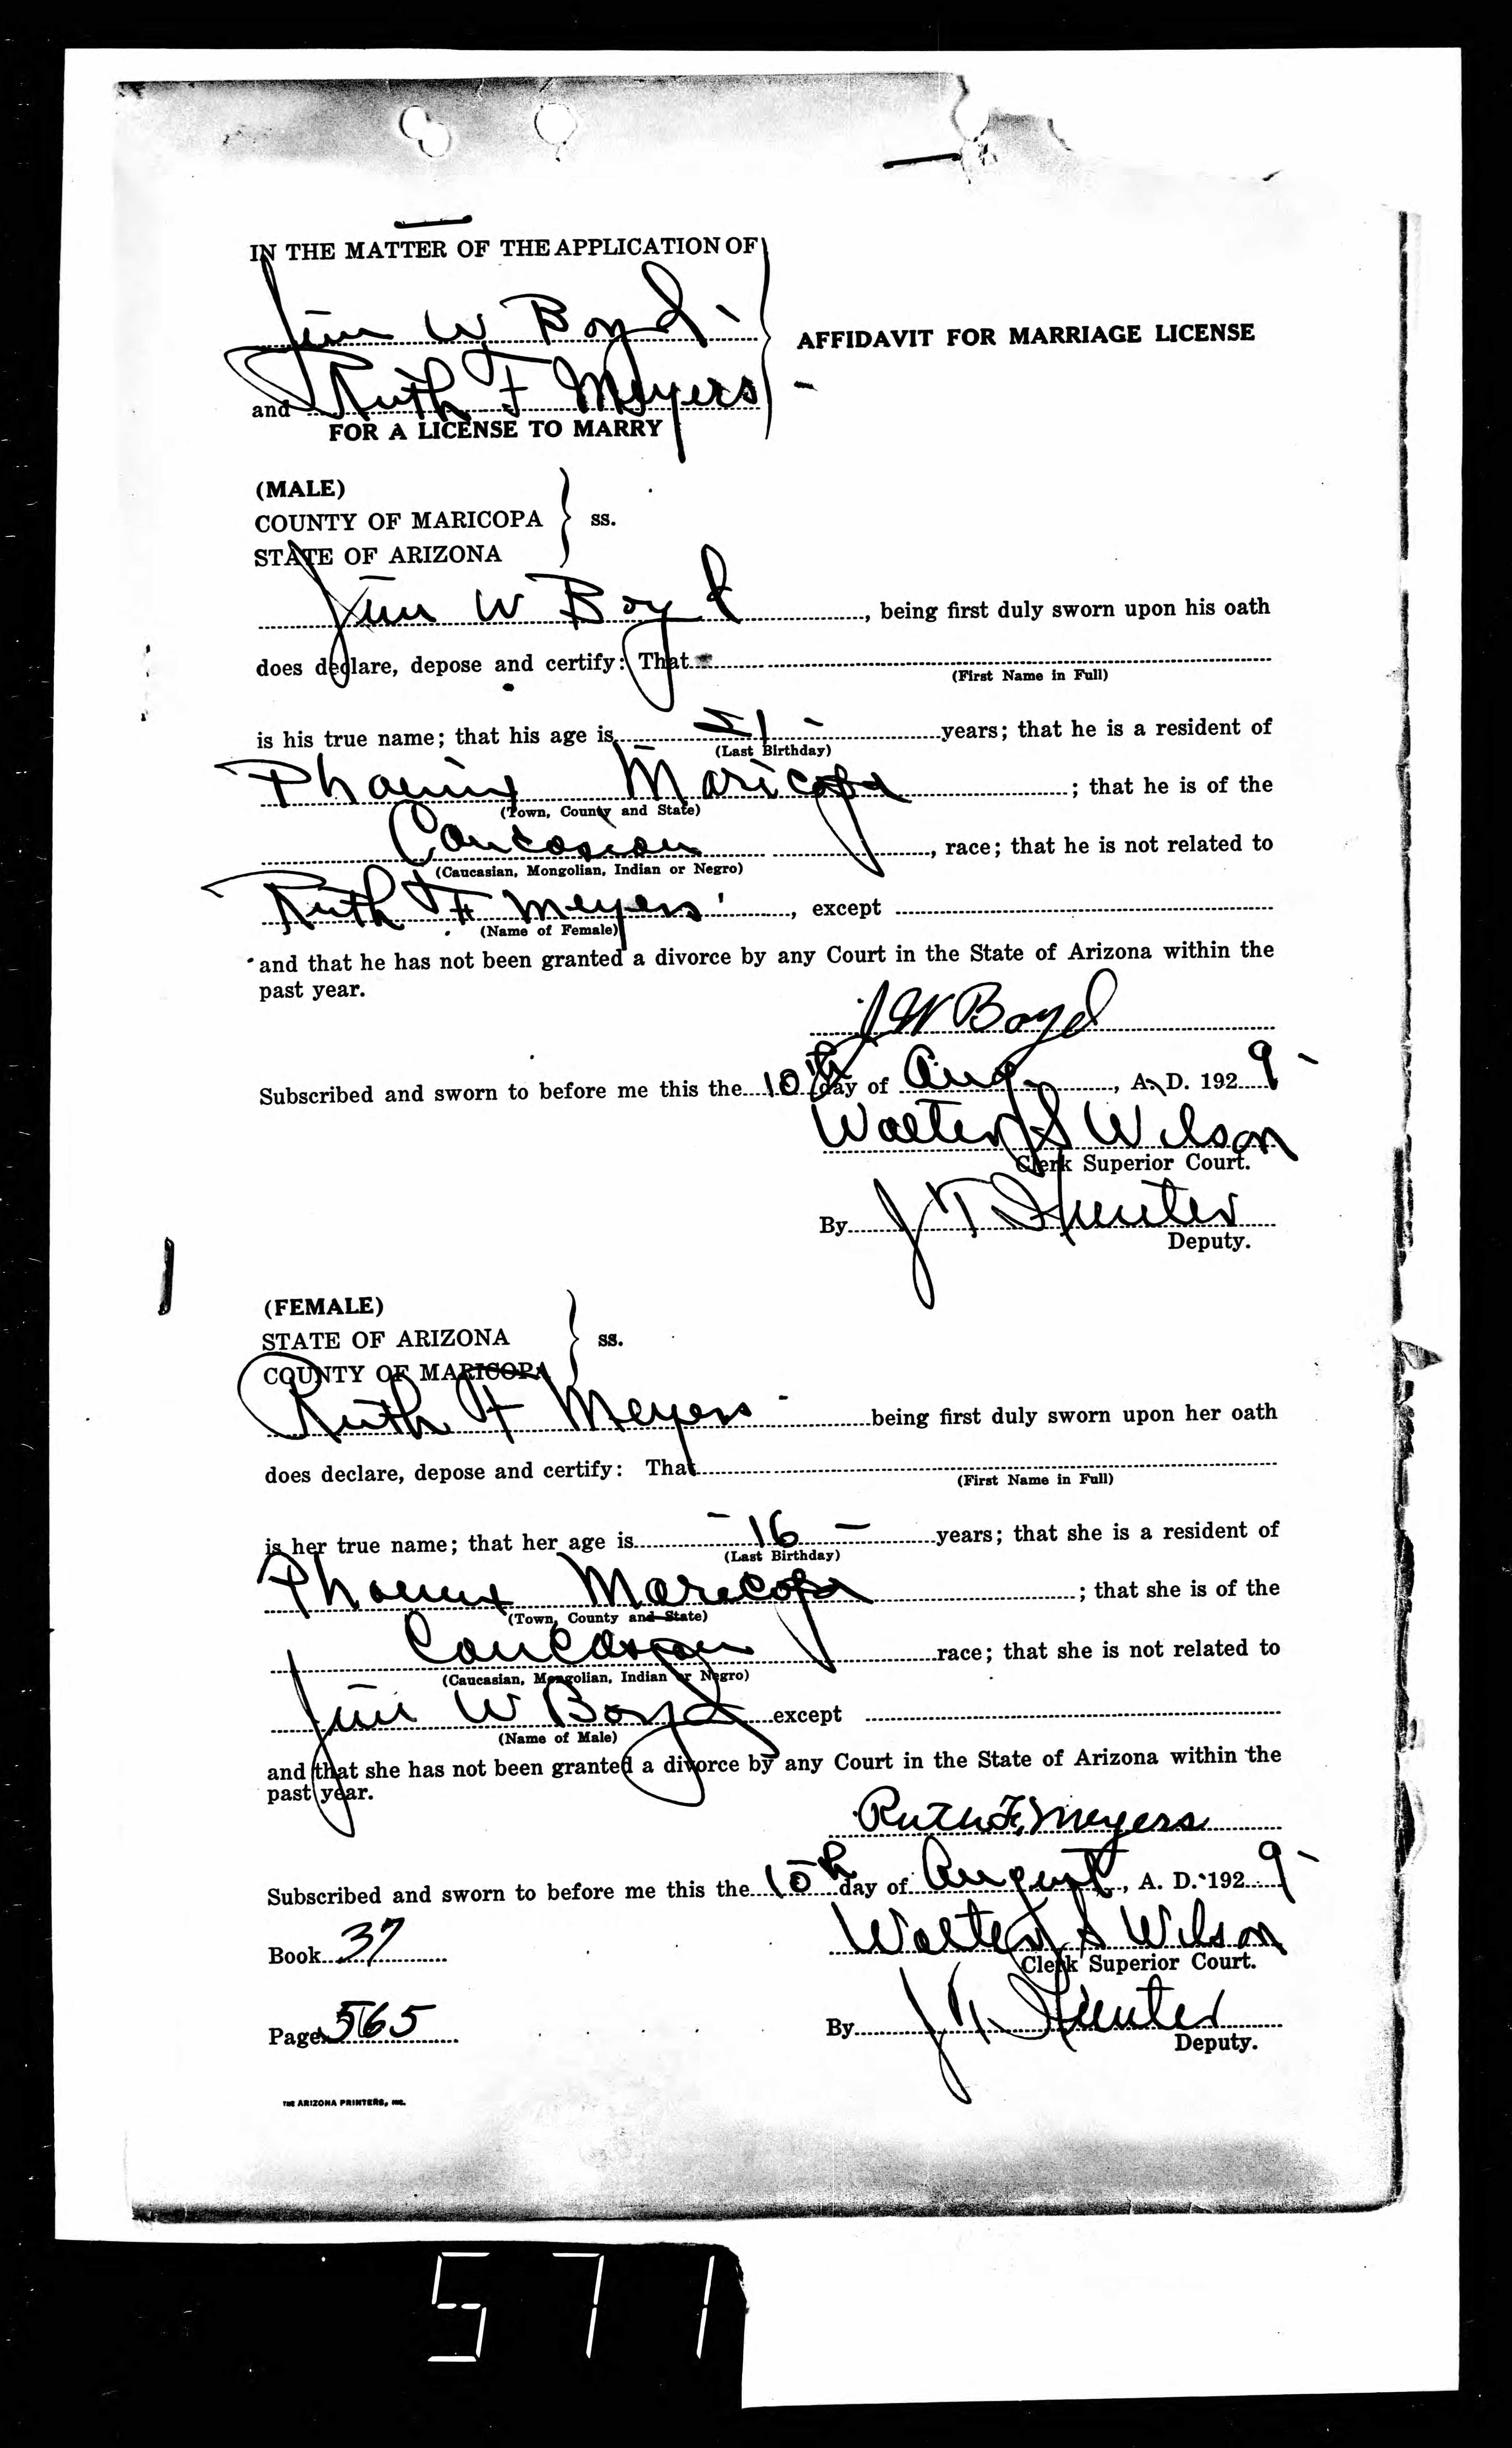 Affadavit for a marriage license for Jim W. Boyd and Ruth F. Meyers